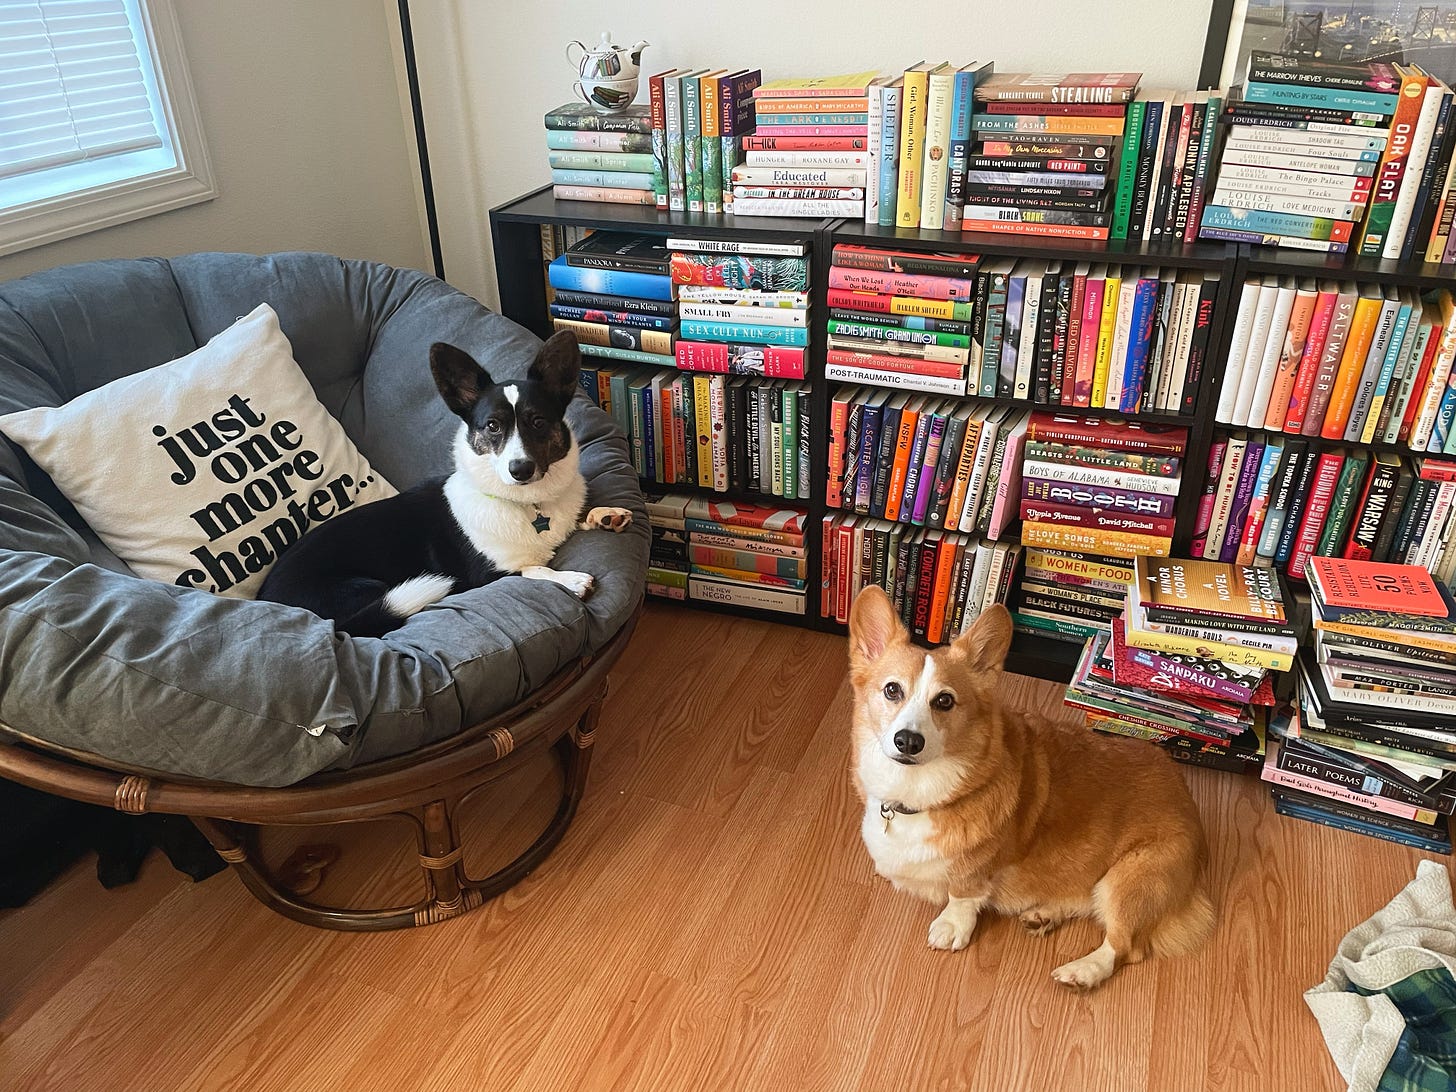 a photo of Dylan, a red and white pembroke welsh corgi, sitting on the floor in front of over-stuffed bookshelves. Gwen, a black and white cardigan Welsh corgi, sitting in a gray chair to the left.